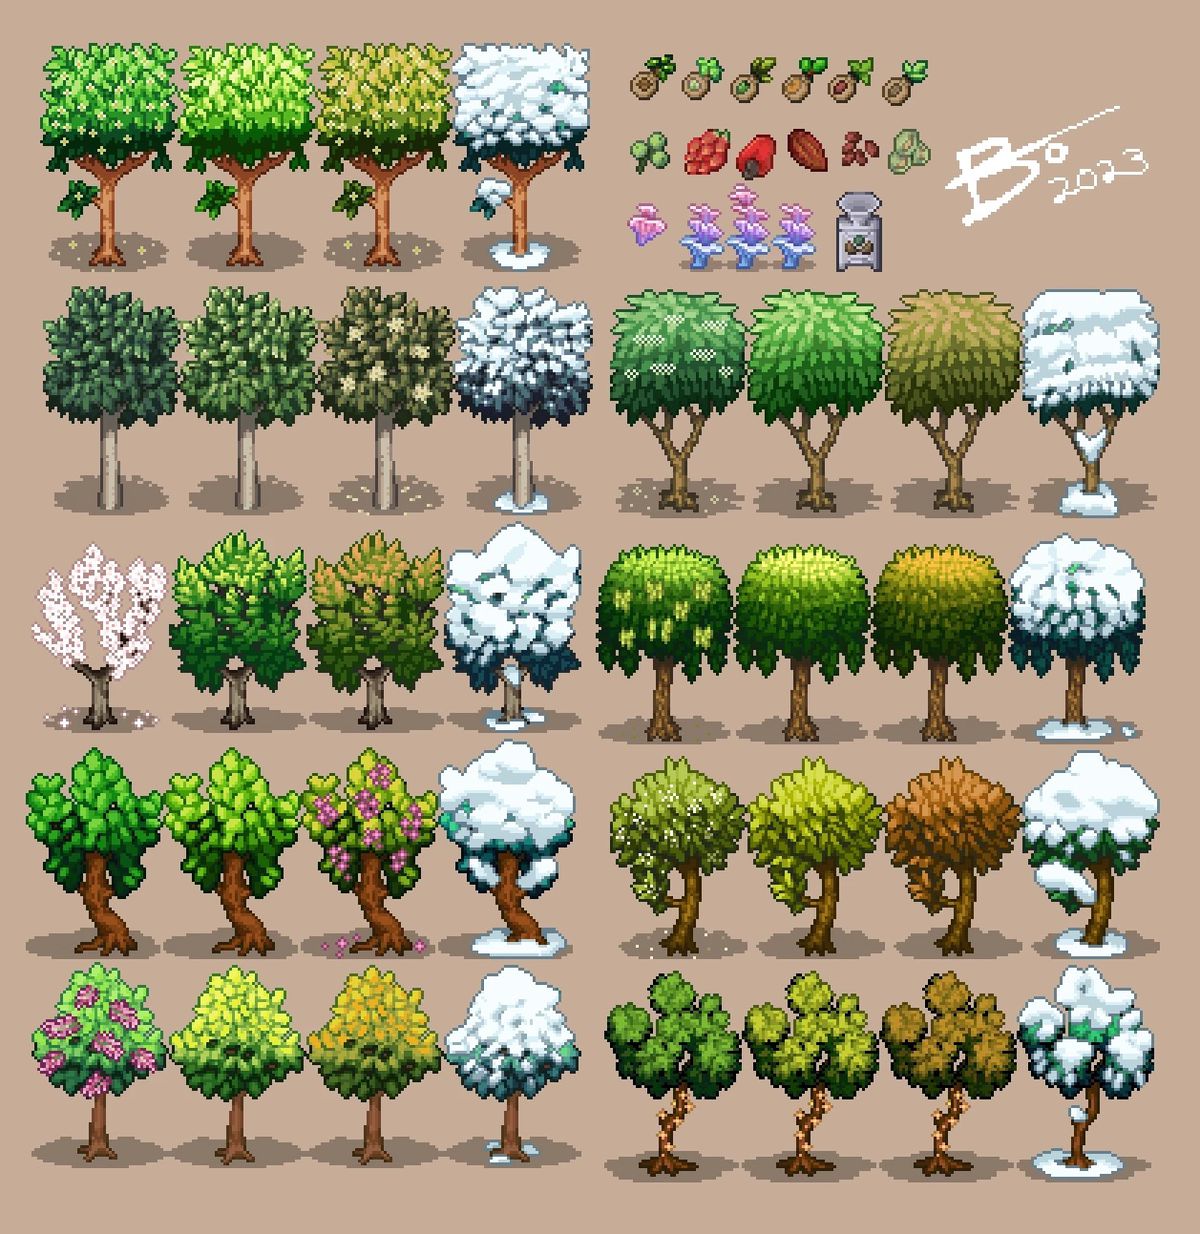 Trees and foraged items from the Wild Food mod for Stardew Valley.